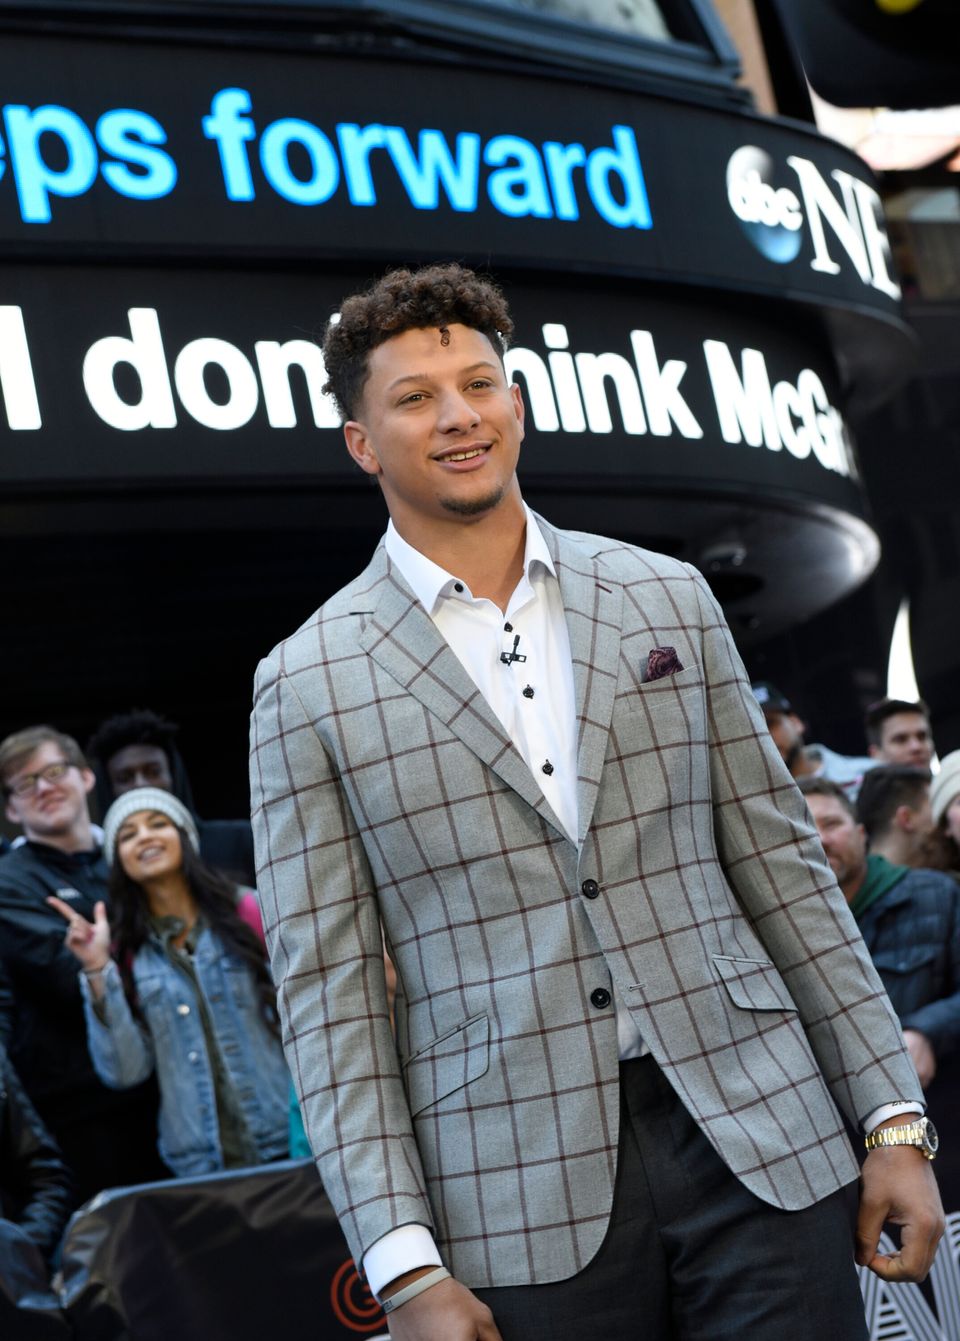 The Story Behind Patrick Mahomes Iconic Hairstyle AKA 'The Mahomes' -  EssentiallySports